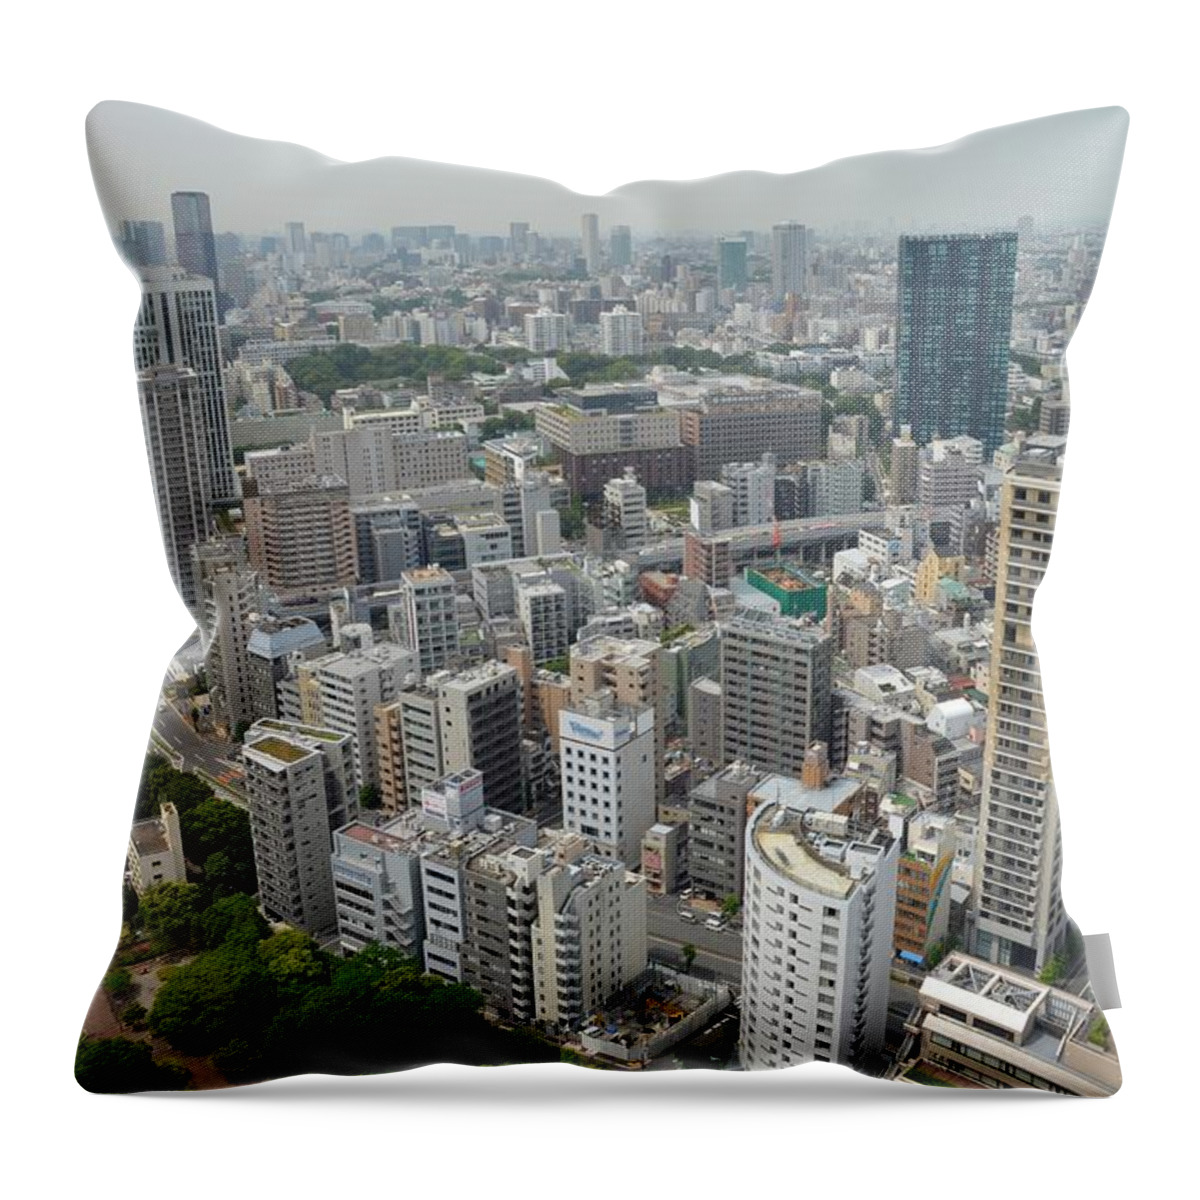 Tokyo Tower Throw Pillow featuring the photograph Tokyo Intersection Skyline View from Tokyo Tower by Jeff at JSJ Photography